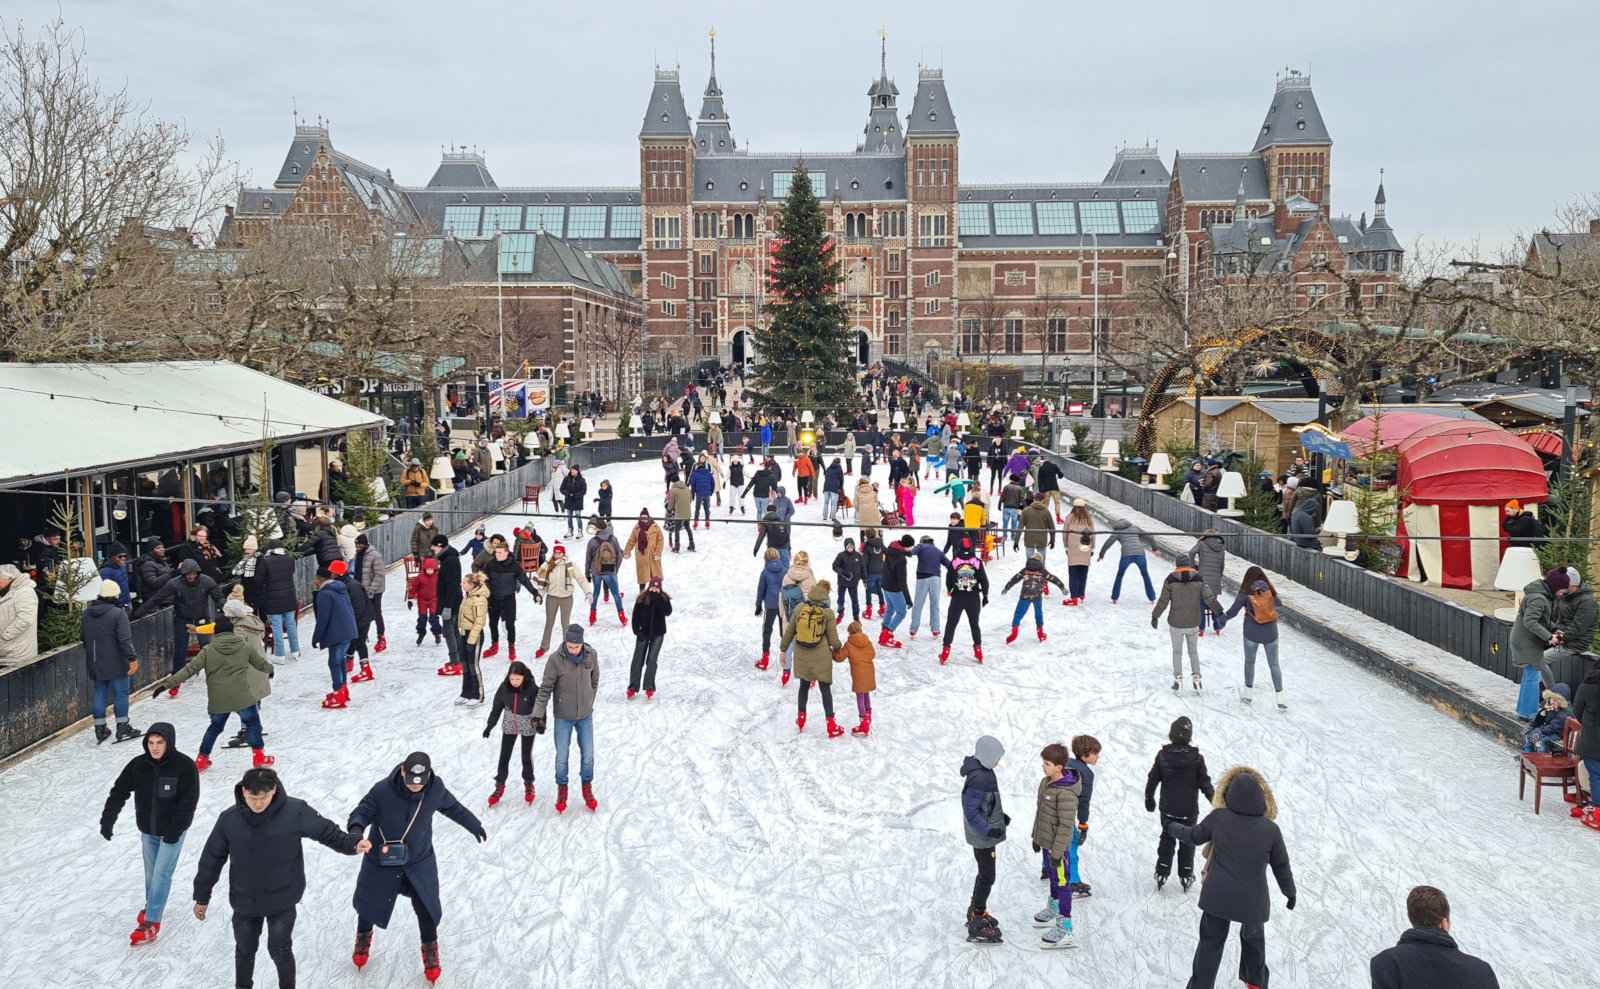 People skating on an ice rink in front of the Rijksmuseum in Amsterdam.